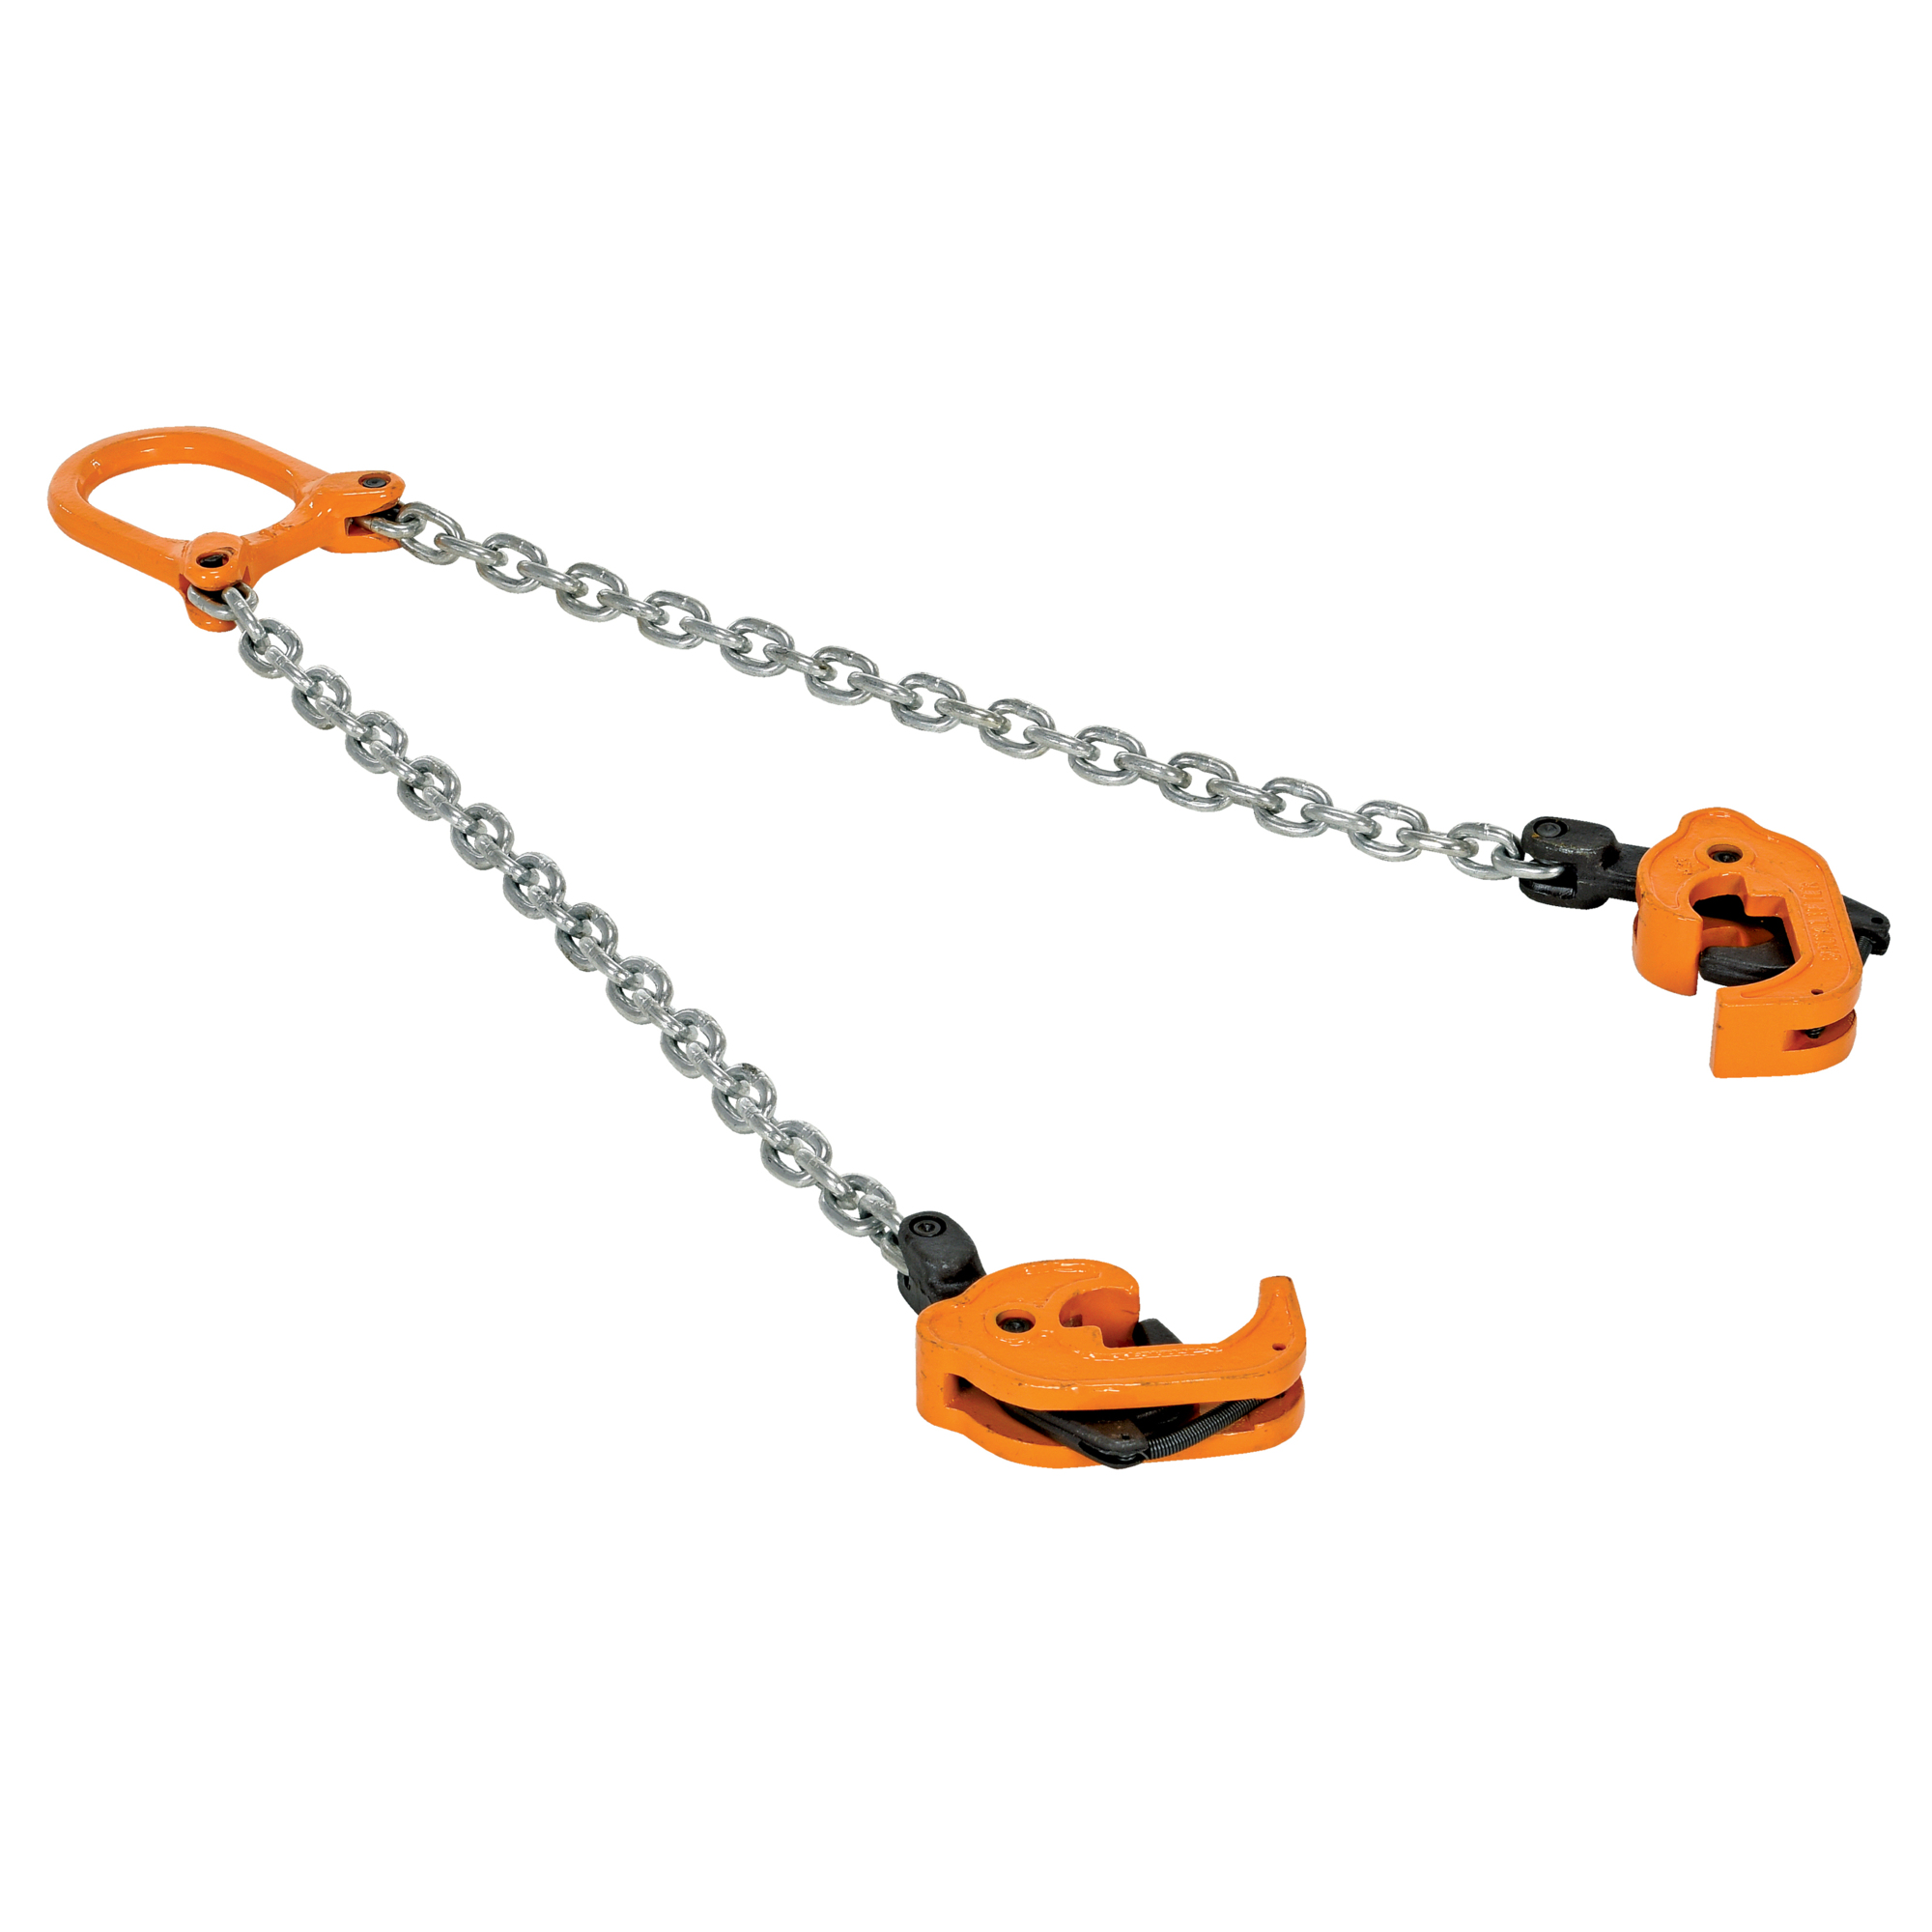 Vestil, Steel chain drum lifter 2k, Capacity 2000 lb, Max. Height 5 in, MInch Height 1 in, Model CDL-2000